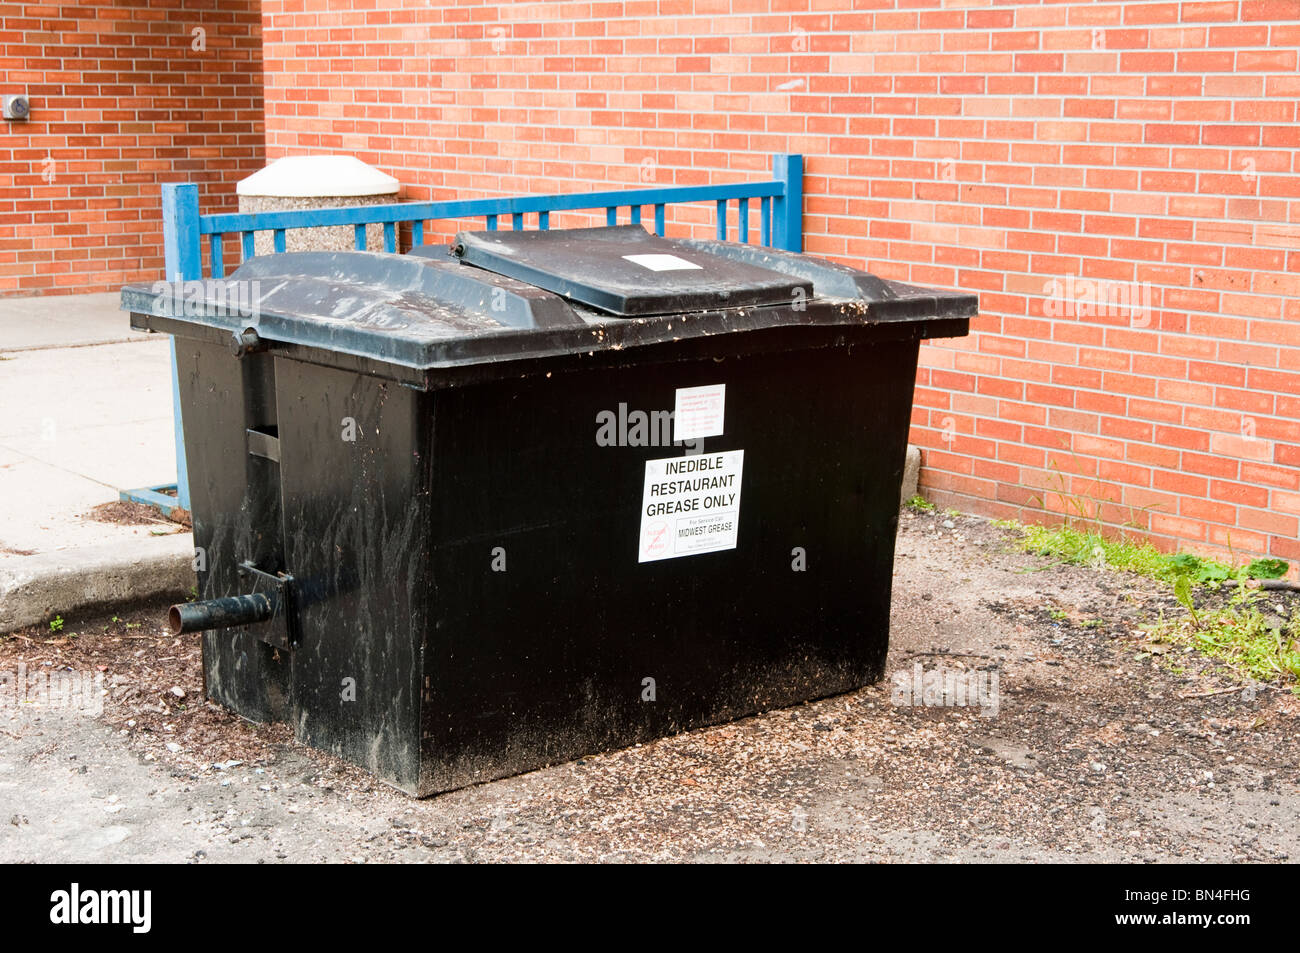 https://c8.alamy.com/comp/BN4FHG/used-grease-is-collected-in-a-bin-located-behind-a-restaurant-the-BN4FHG.jpg